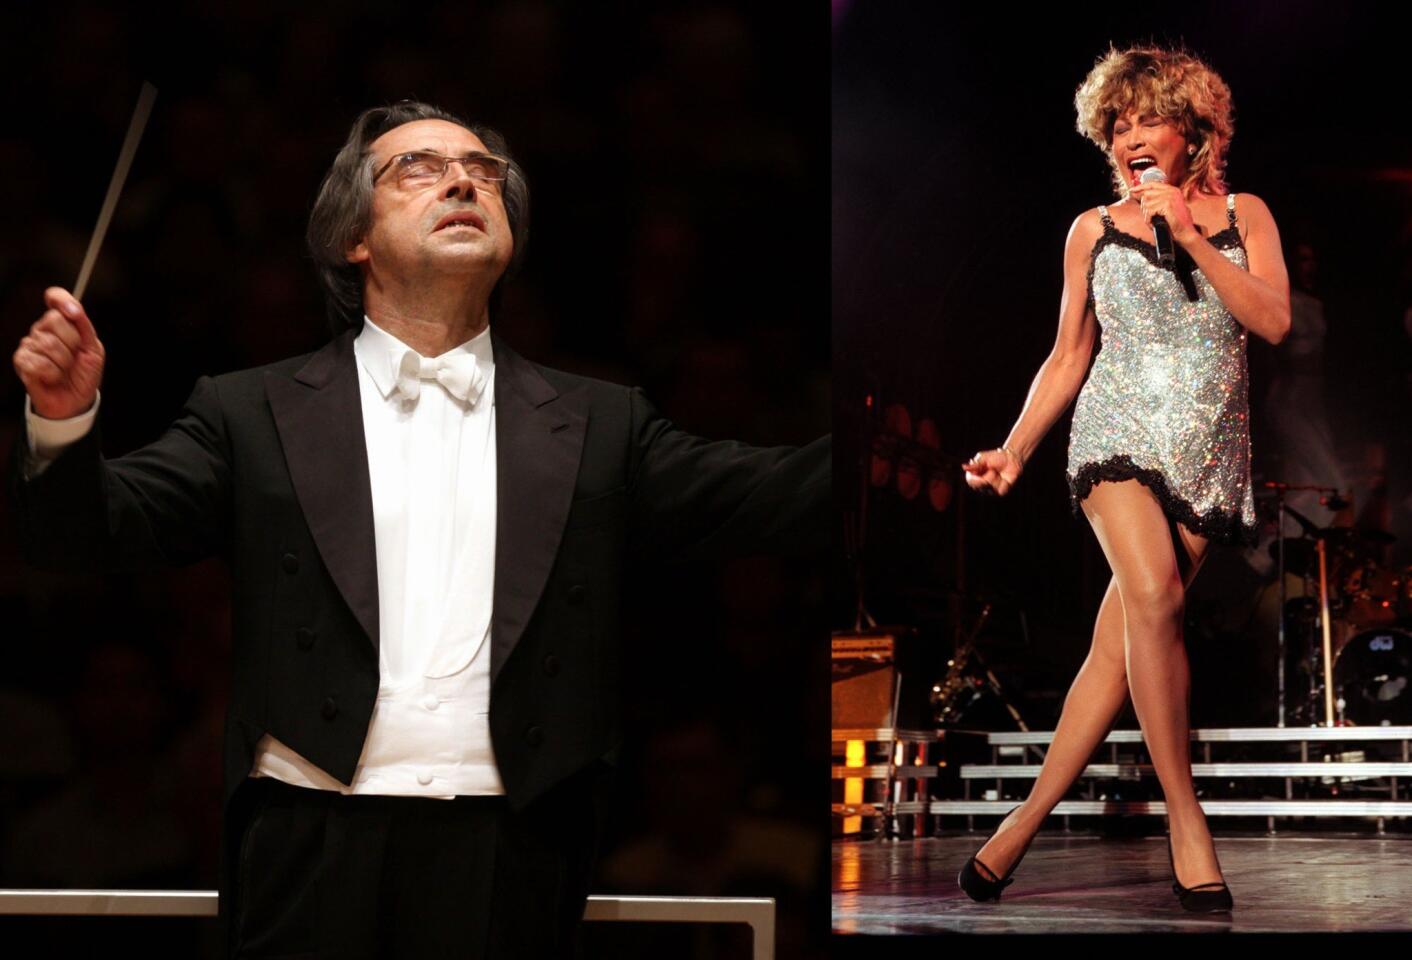 Riccardo Muti: 71, music director of the Chicago Symphony